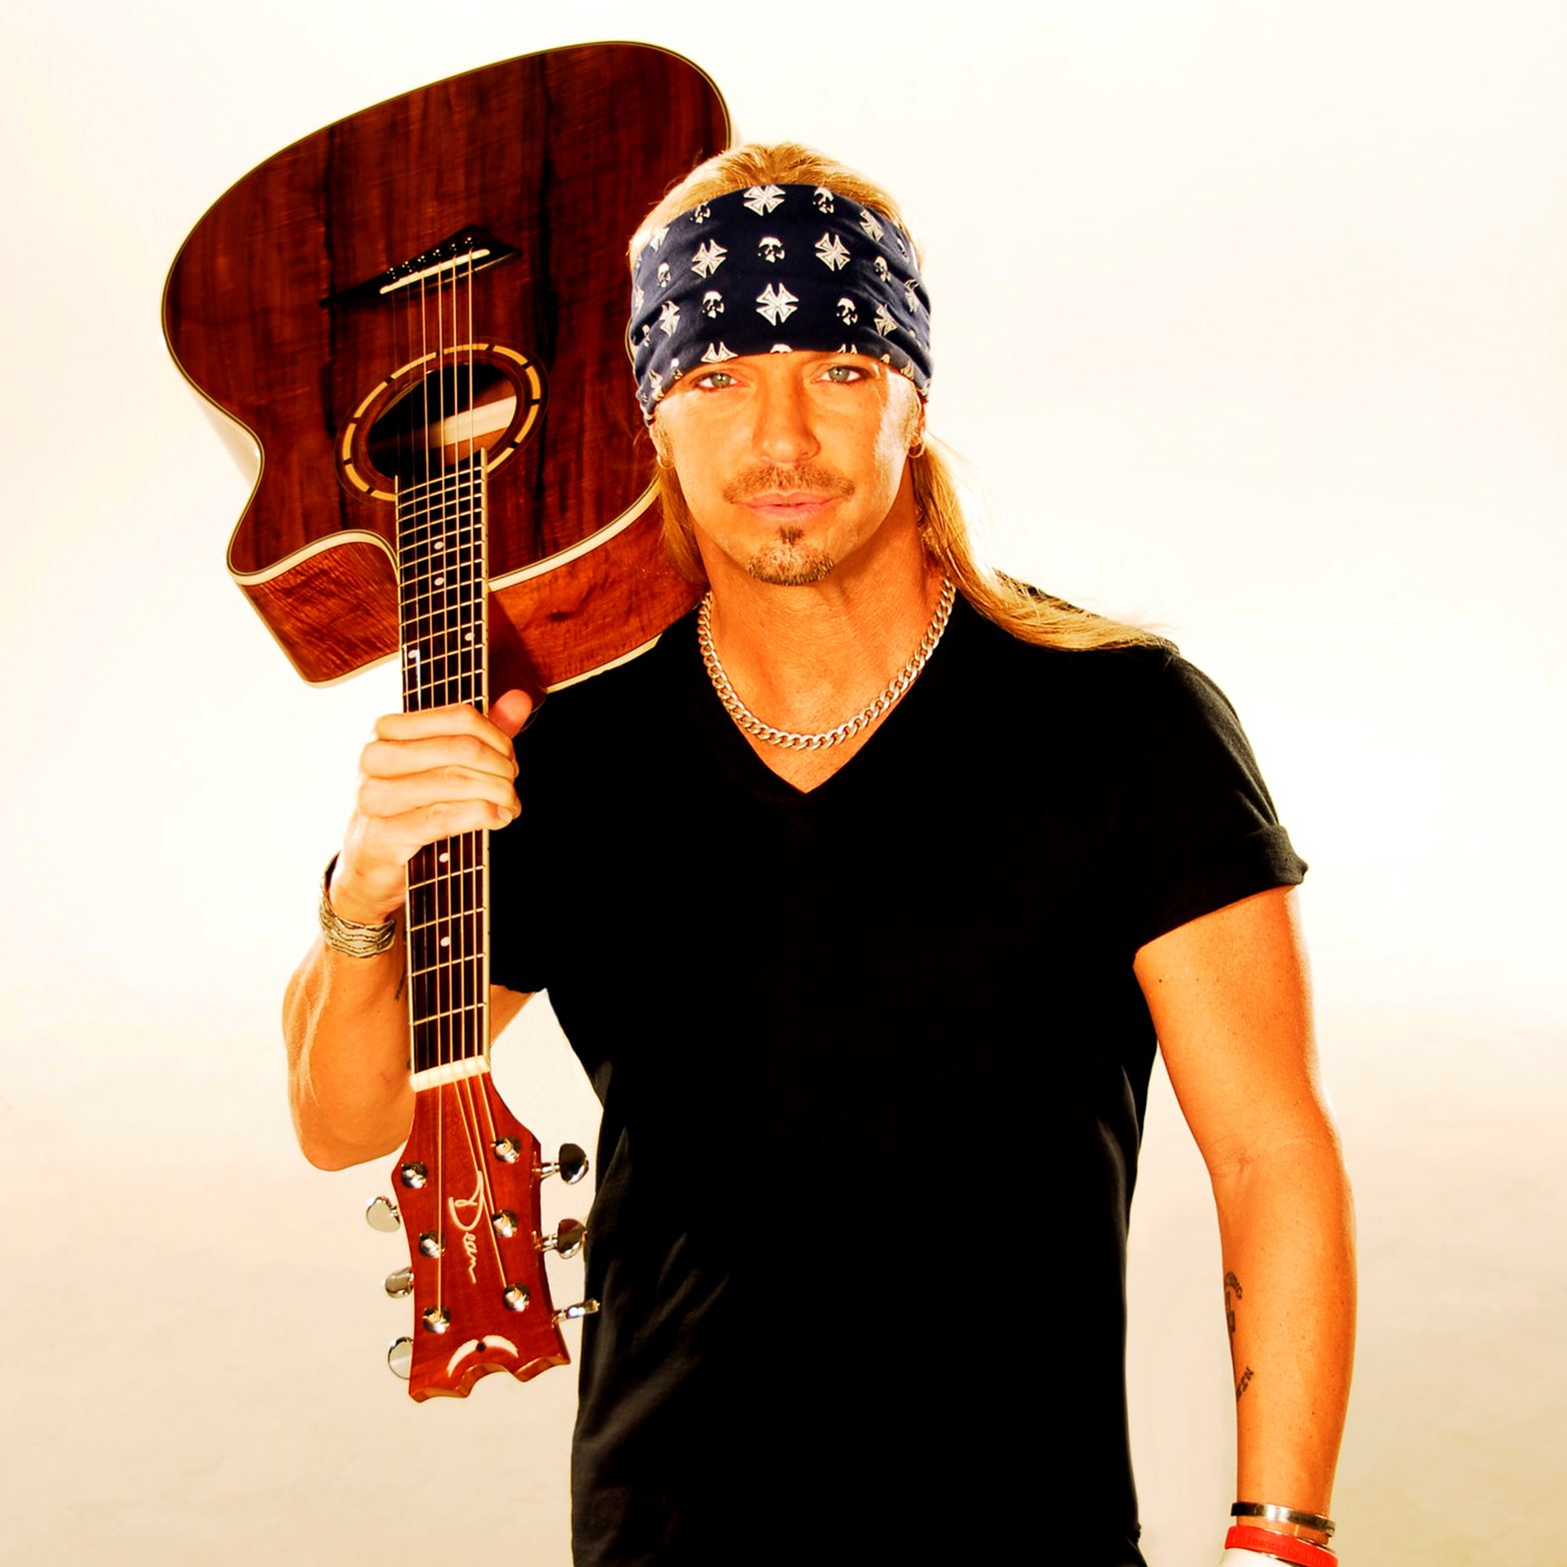 PRCA Rodeo w/ Bret Michaels <br> Friday, Feb. 17 at 7 PM